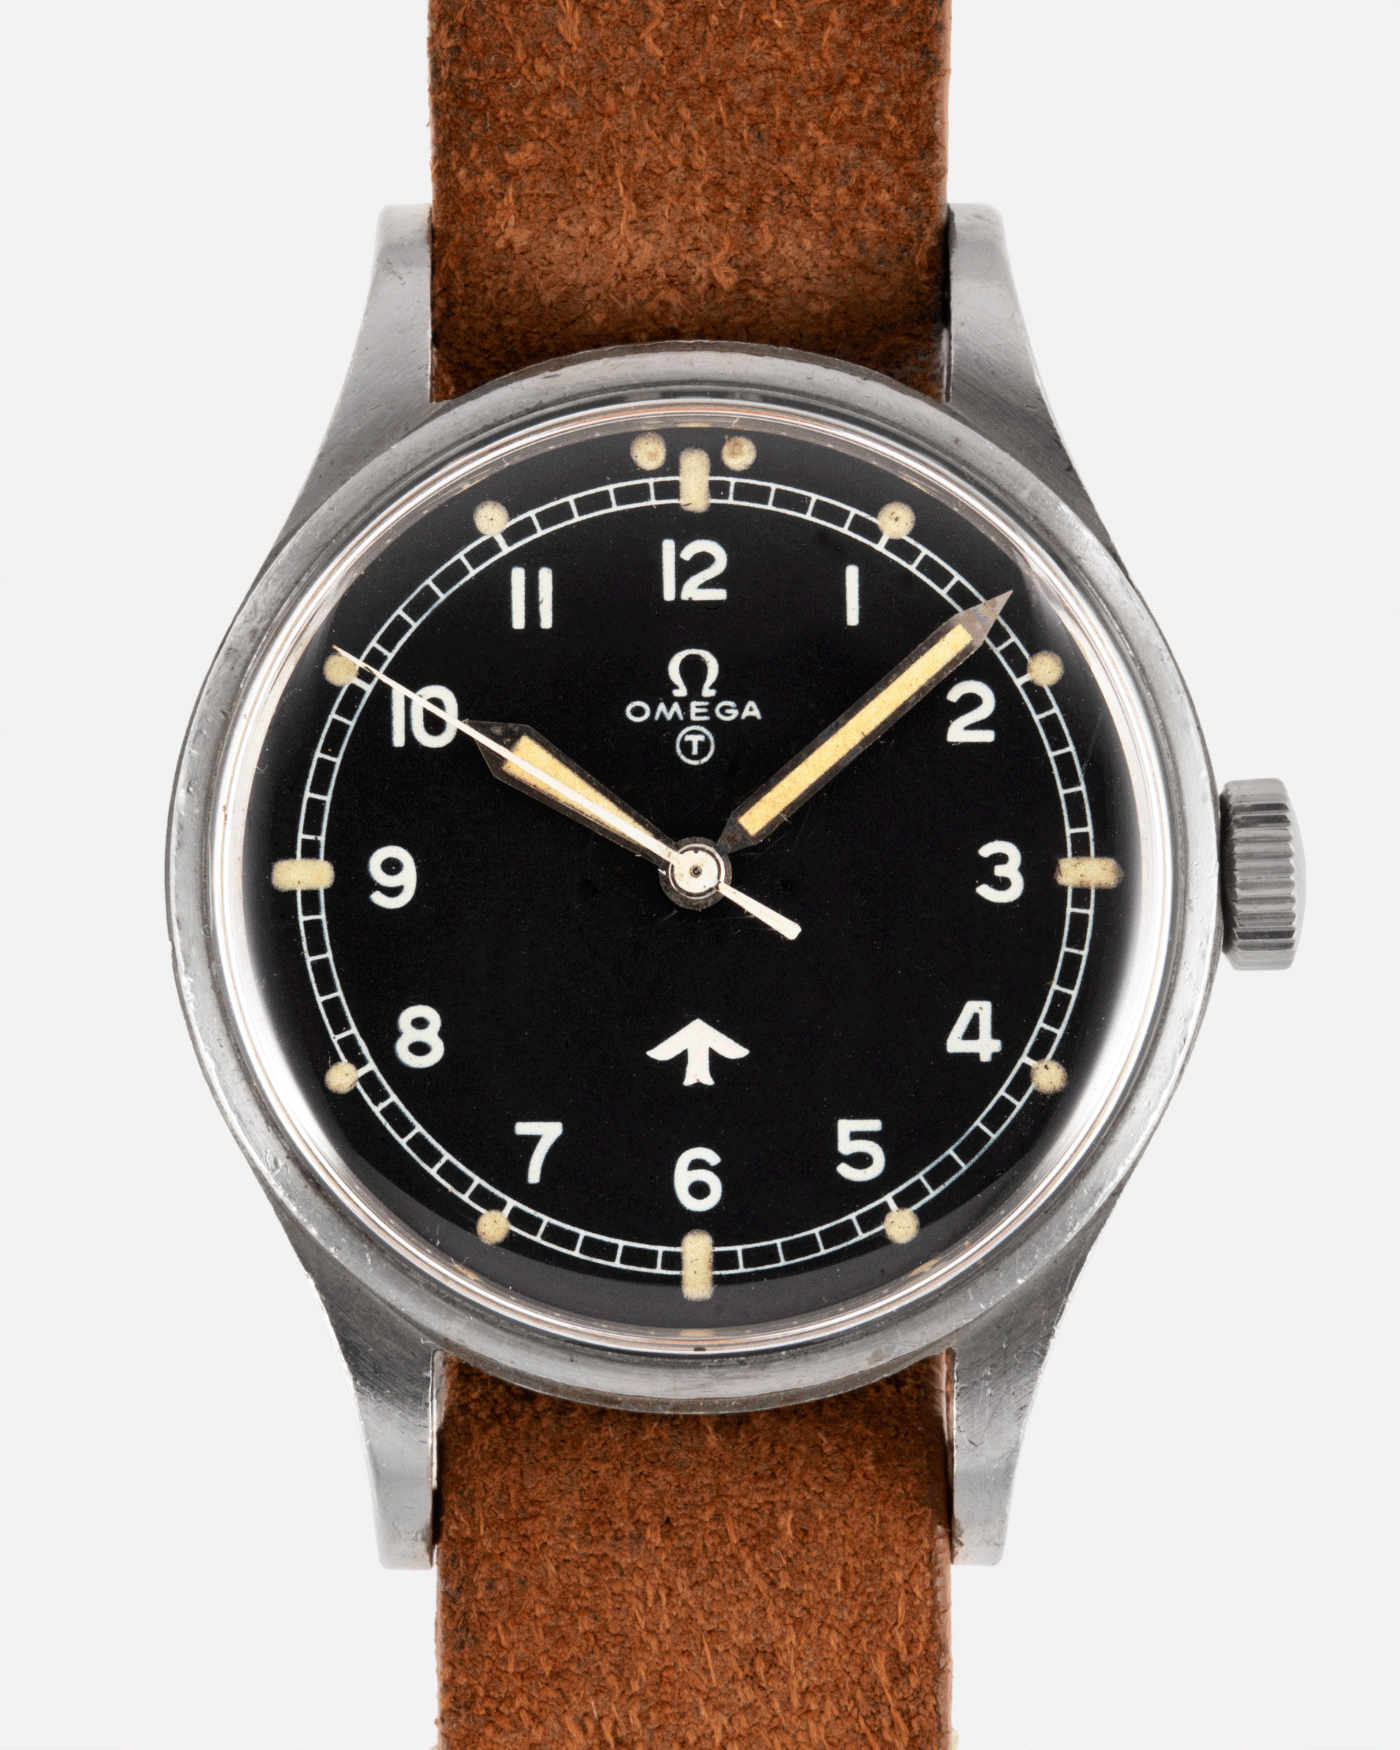 Brand: Omega Year: 1953 Model: Fat Arrow 53 Reference Number: CK 2777-1 Material: Stainless Steel Movement: ‘Specially Adjusted’ Cal. 283 Case Diameter: 37mm Lug Width: 18mm Bracelet/Strap: JPM X S.Song Sand Brown Distressed Leather NATO